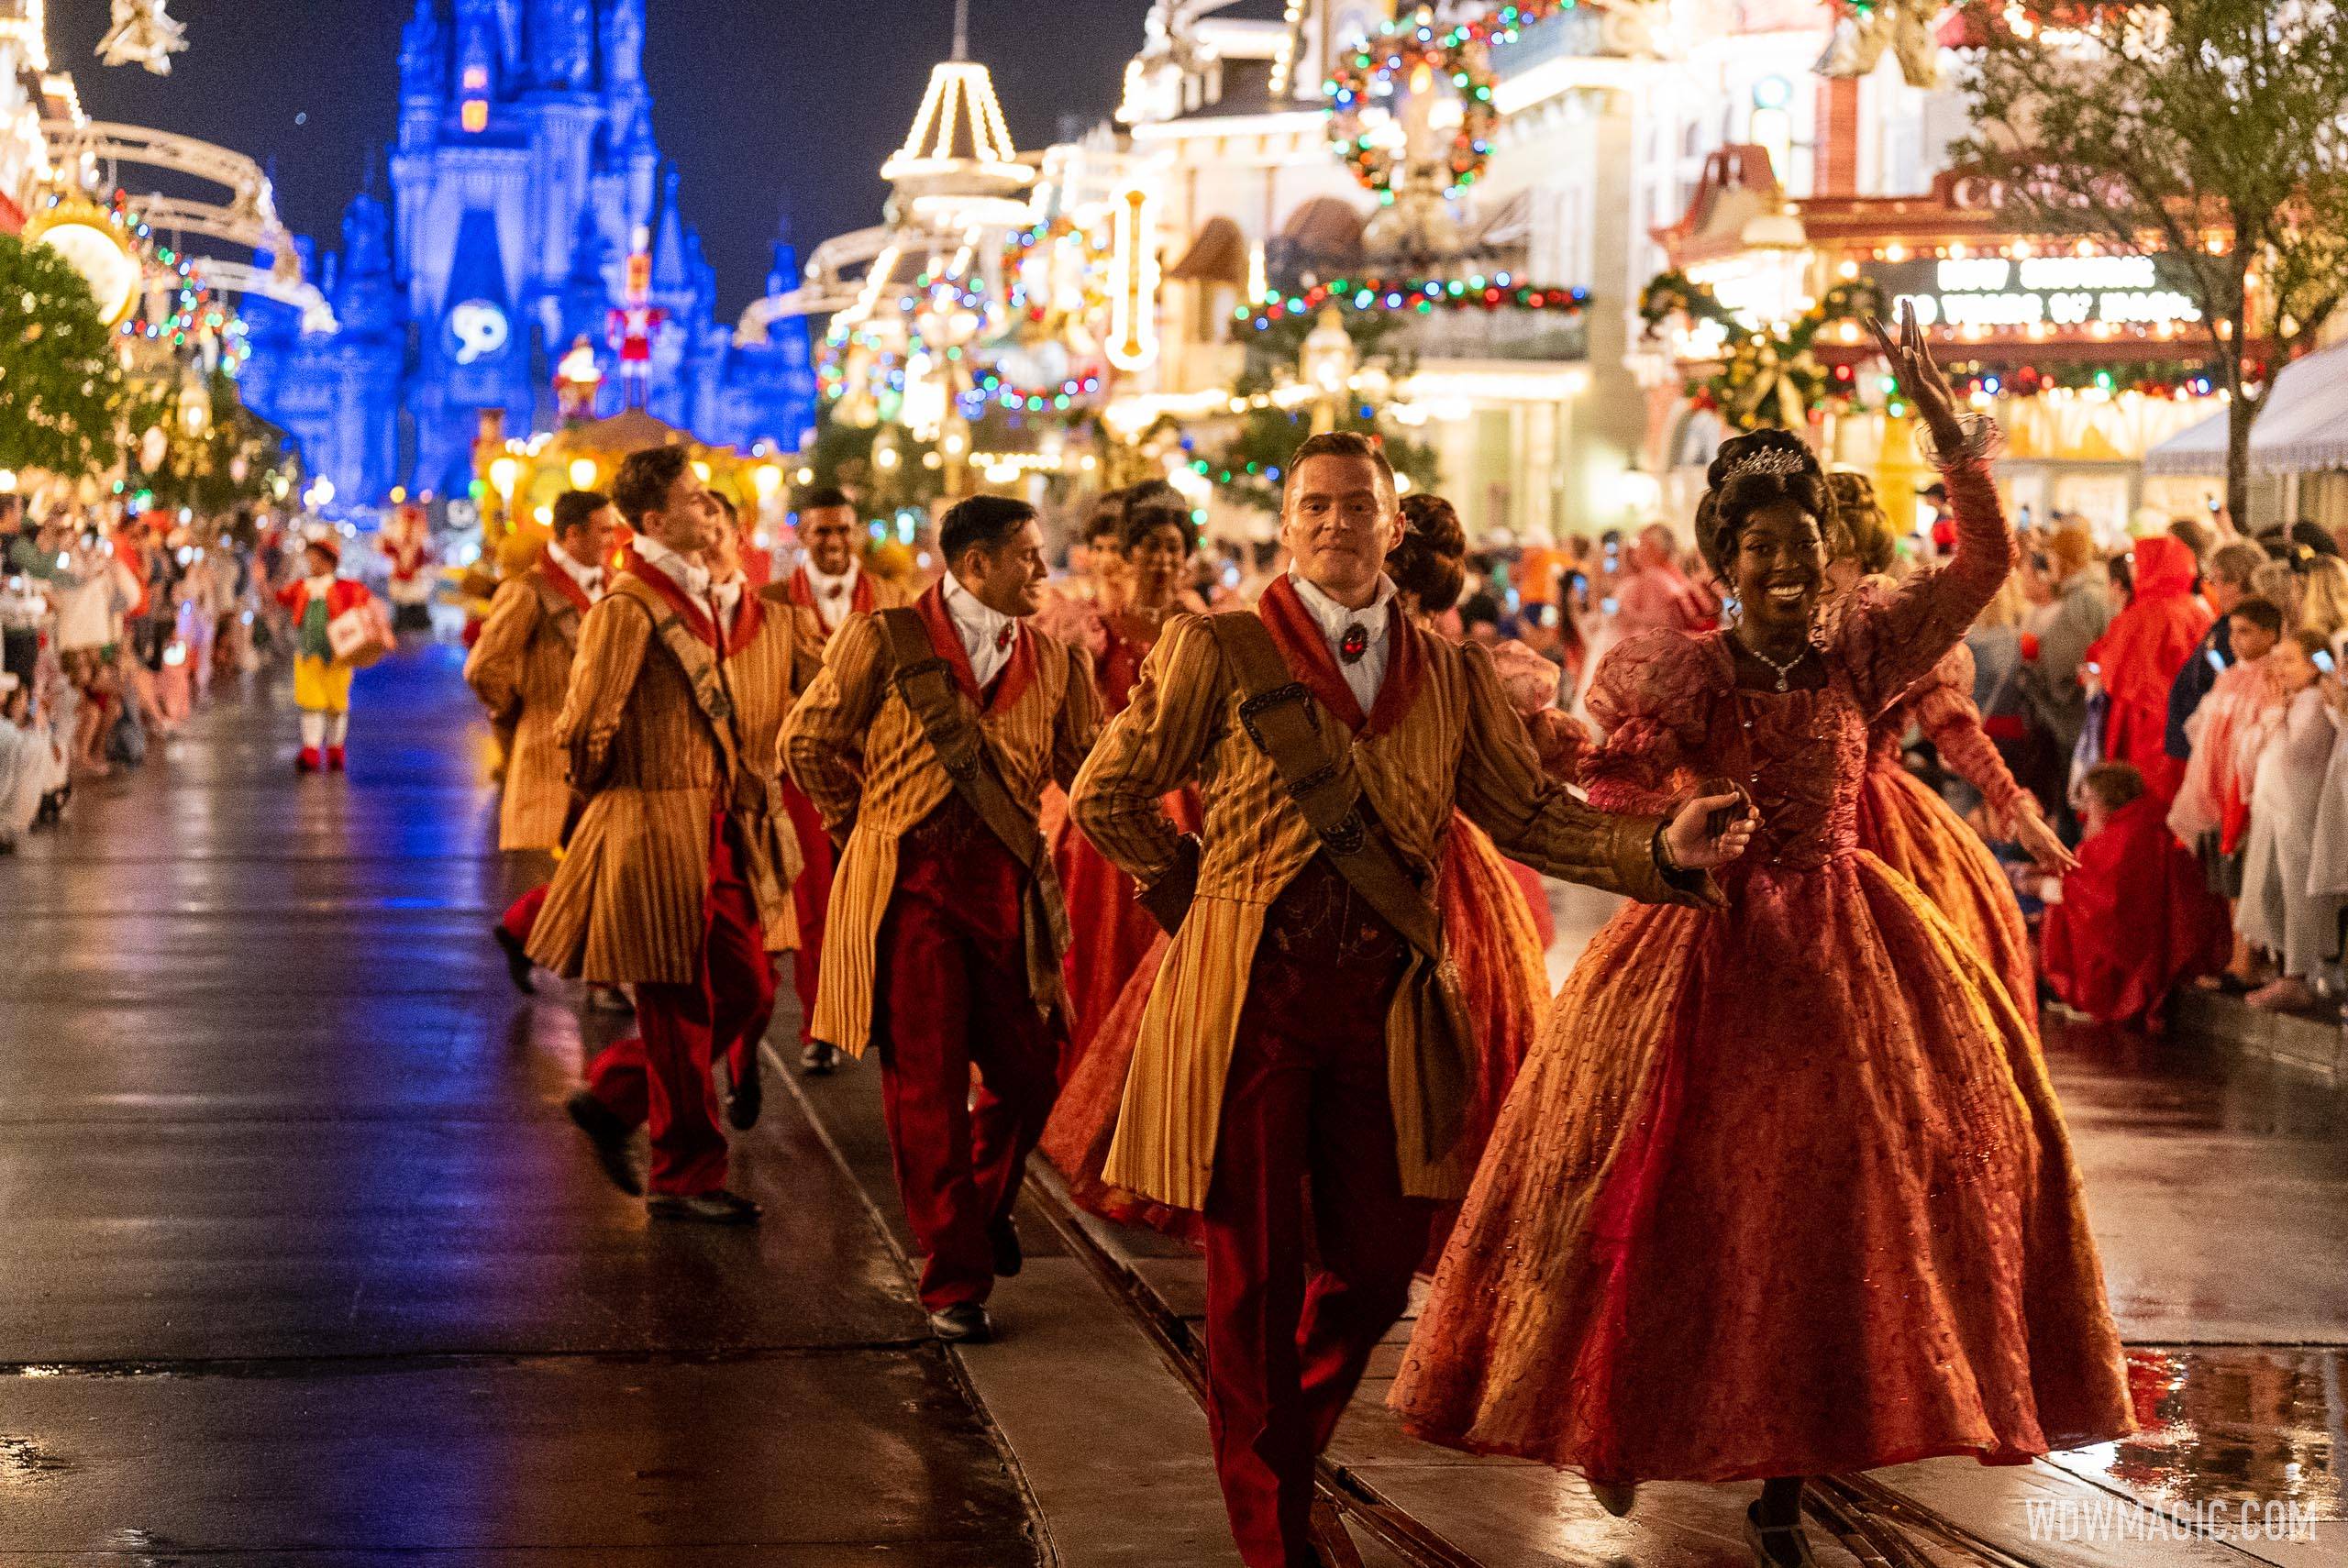 Mickey’s Once Upon a Christmastime Parade to be shown during regular park hours from the 20th